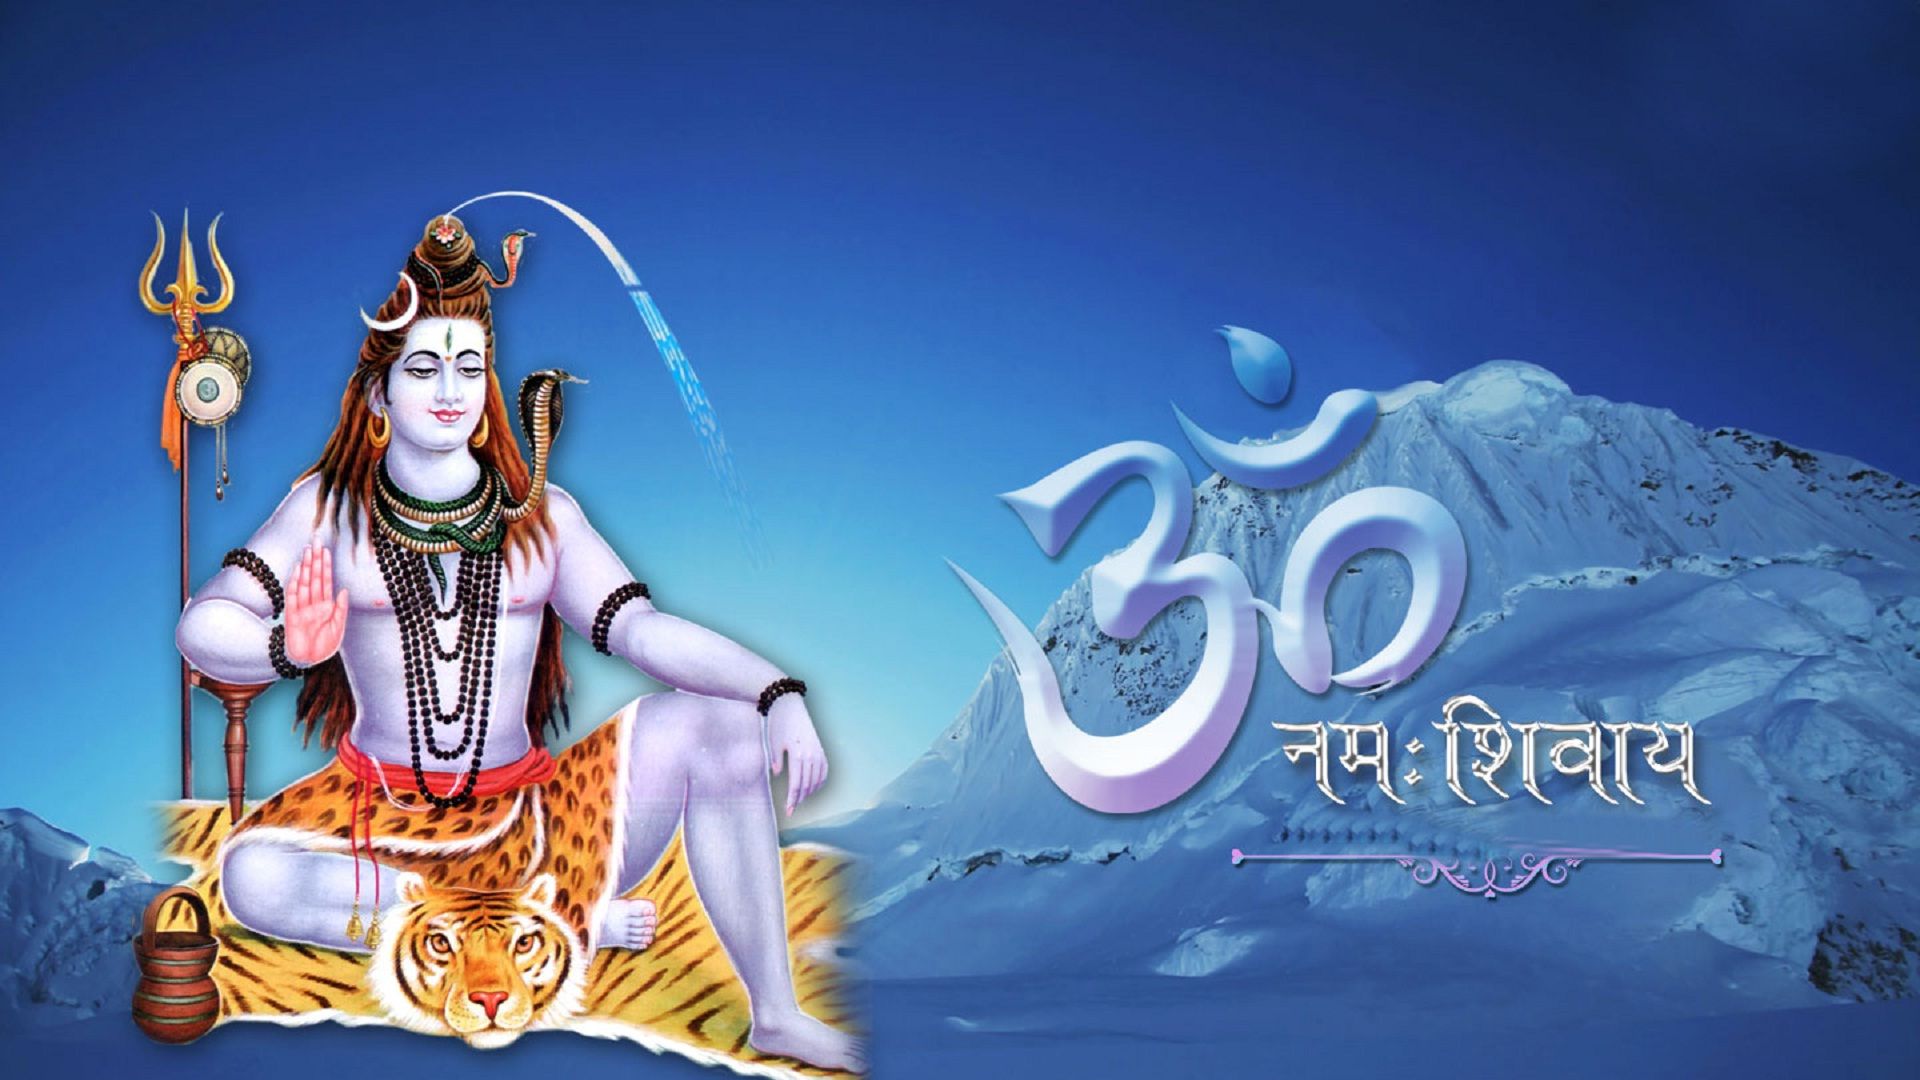 Lord Shiva Images For Whatsapp Dp